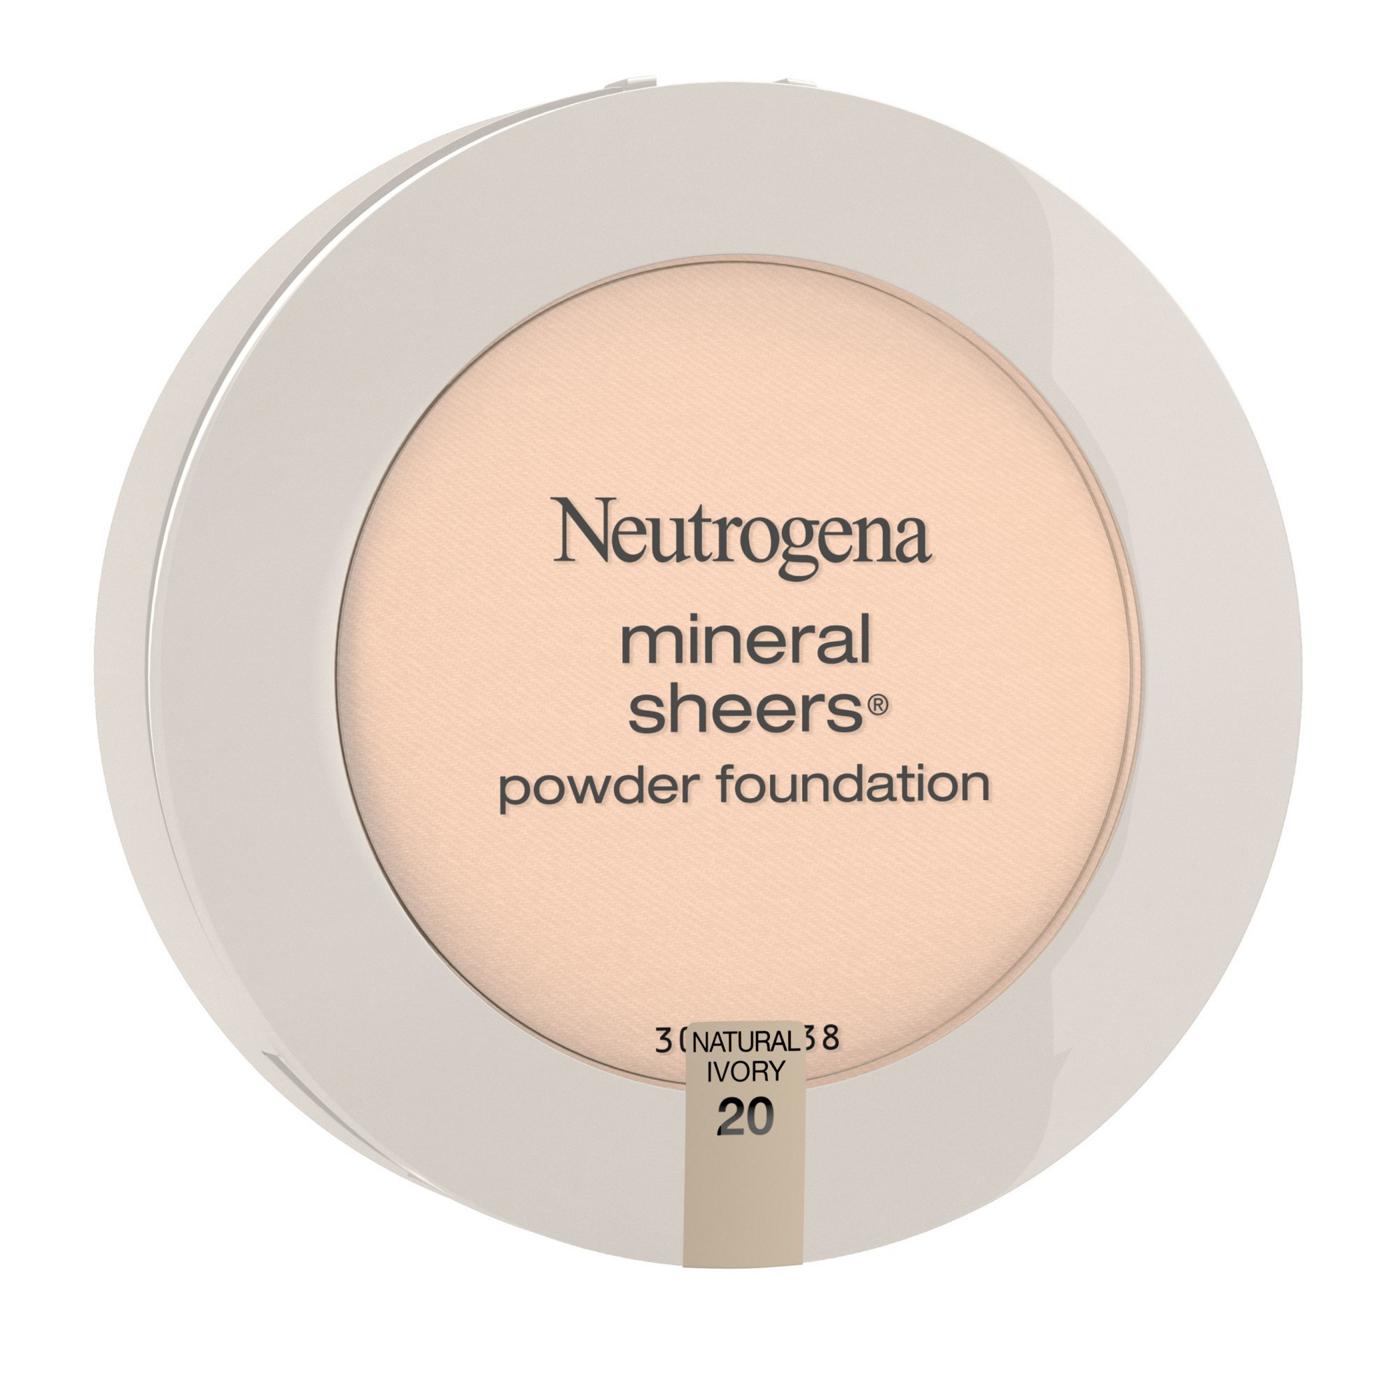 Neutrogena Mineral Sheers Compact Powder Foundation 20 Natural Ivory; image 3 of 6